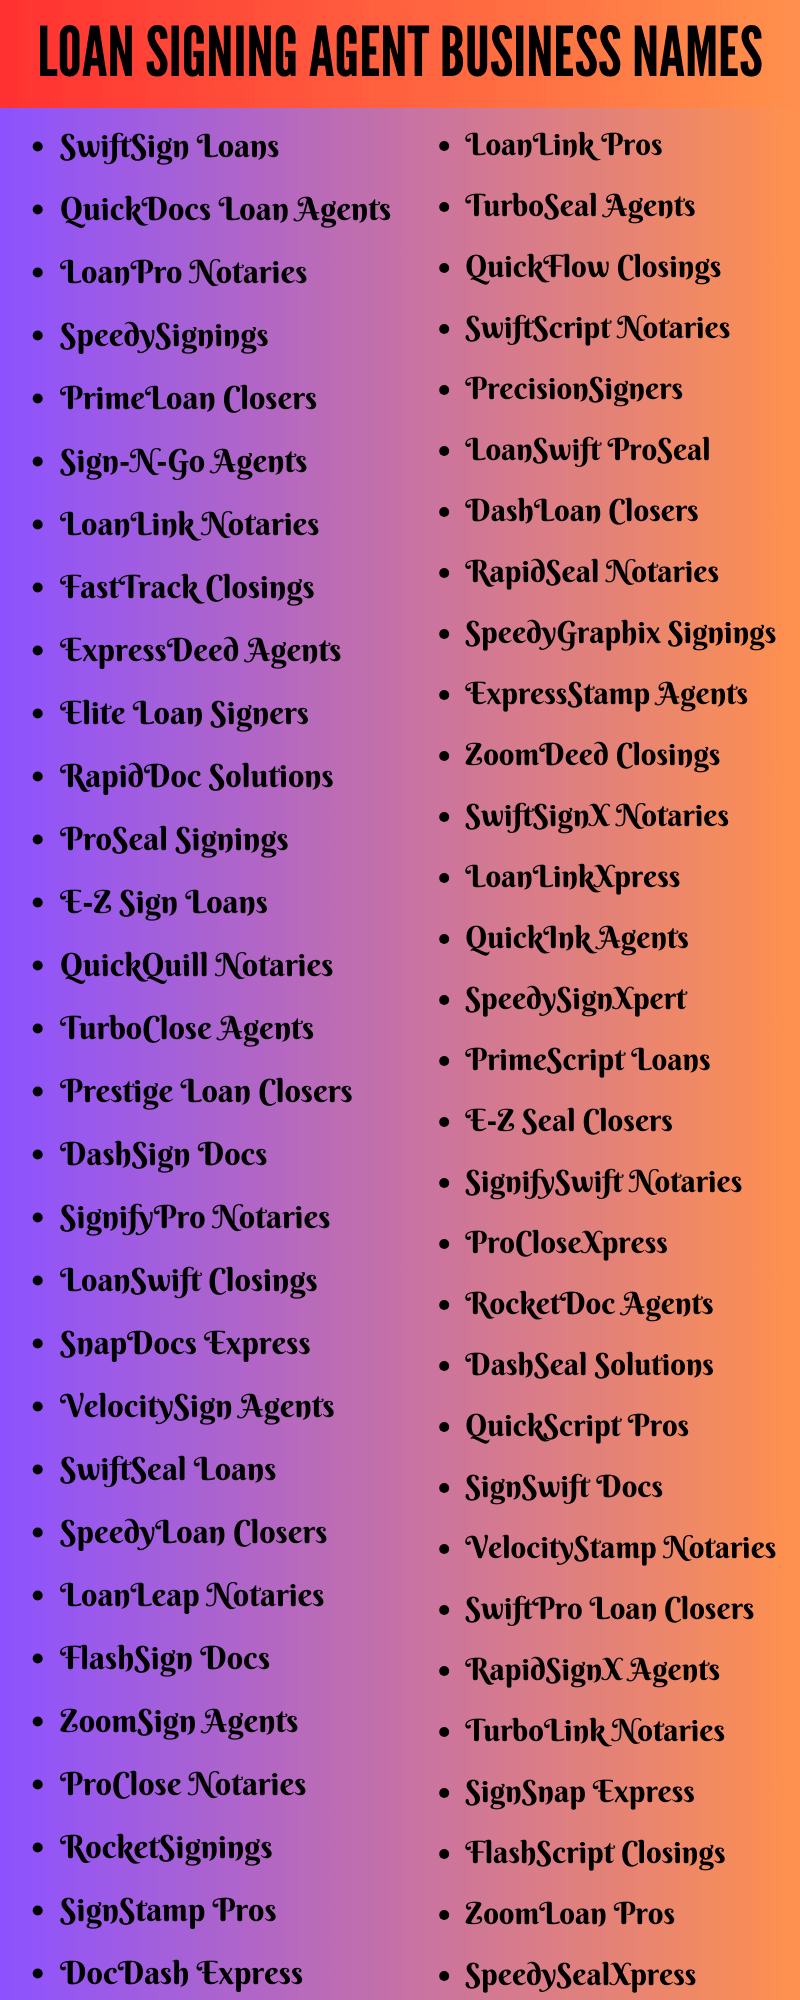 Loan Signing Agent Business Names